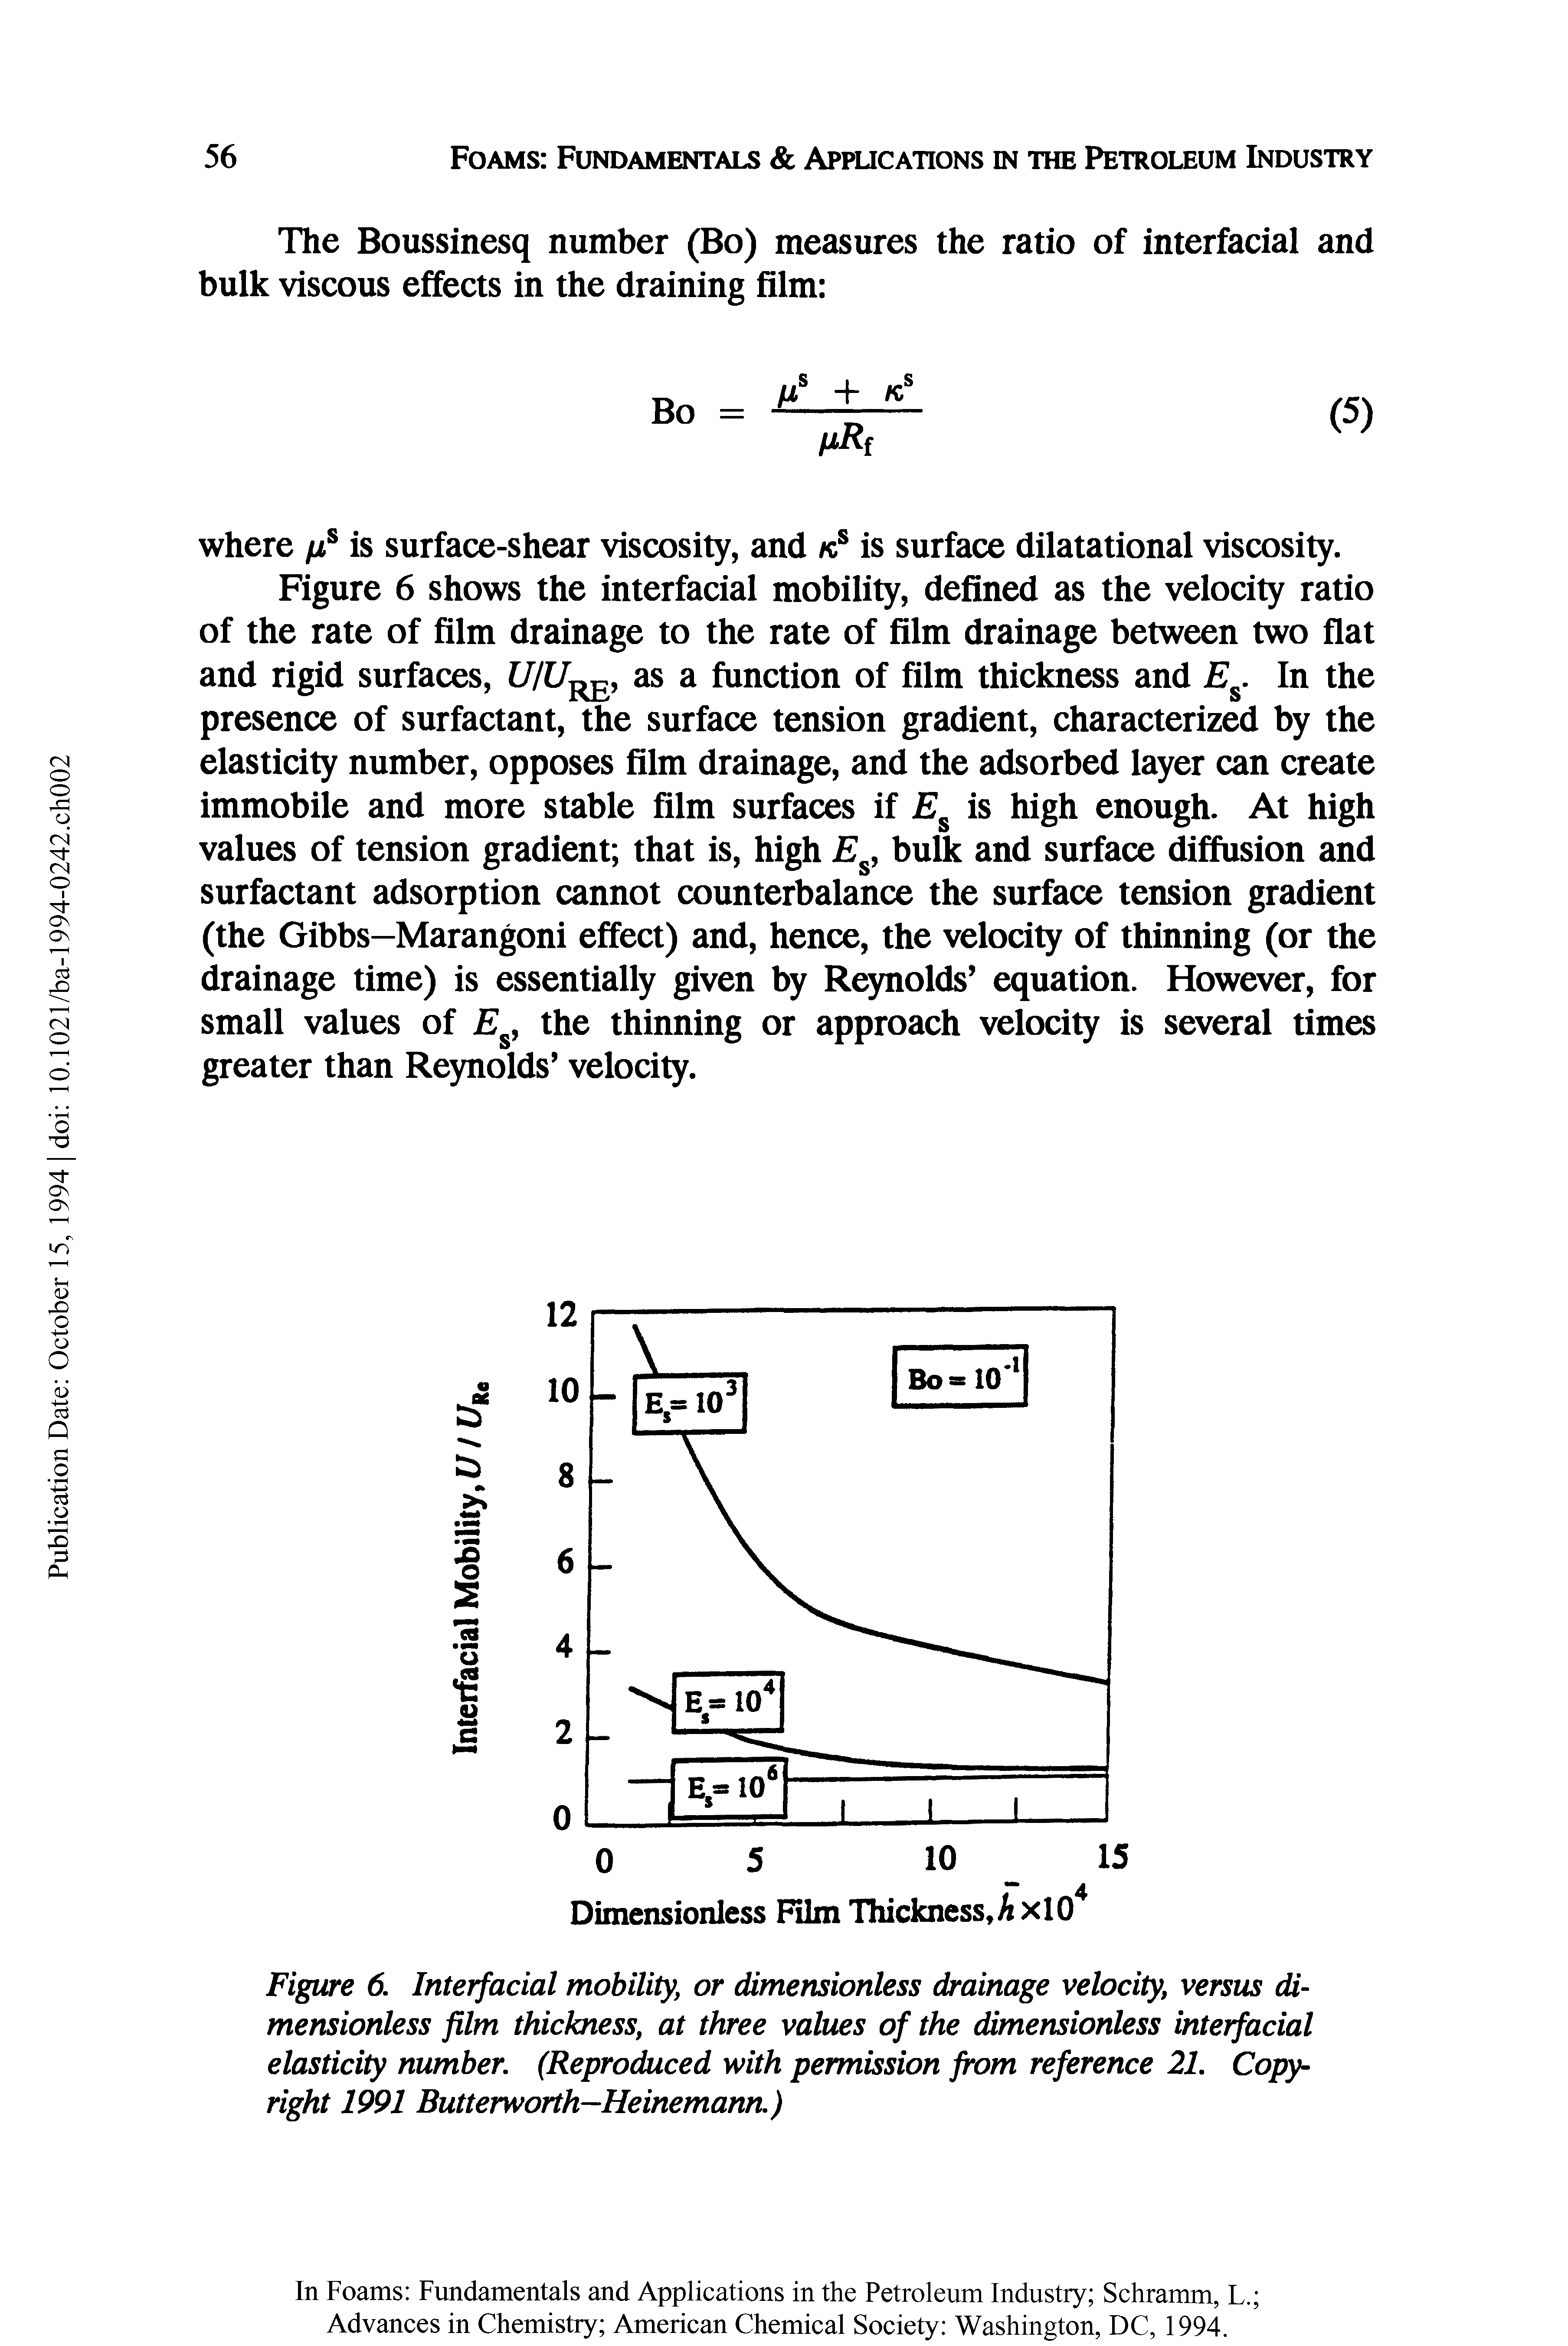 Figure 6. Interfacial mobility, or dimensionless drainage velocity, versus dimensionless film thickness, at three values of the dimensionless interfacial elasticity number. (Reproduced with permission from reference 21. Copyright 1991 Butterworth—Heinemann.)...